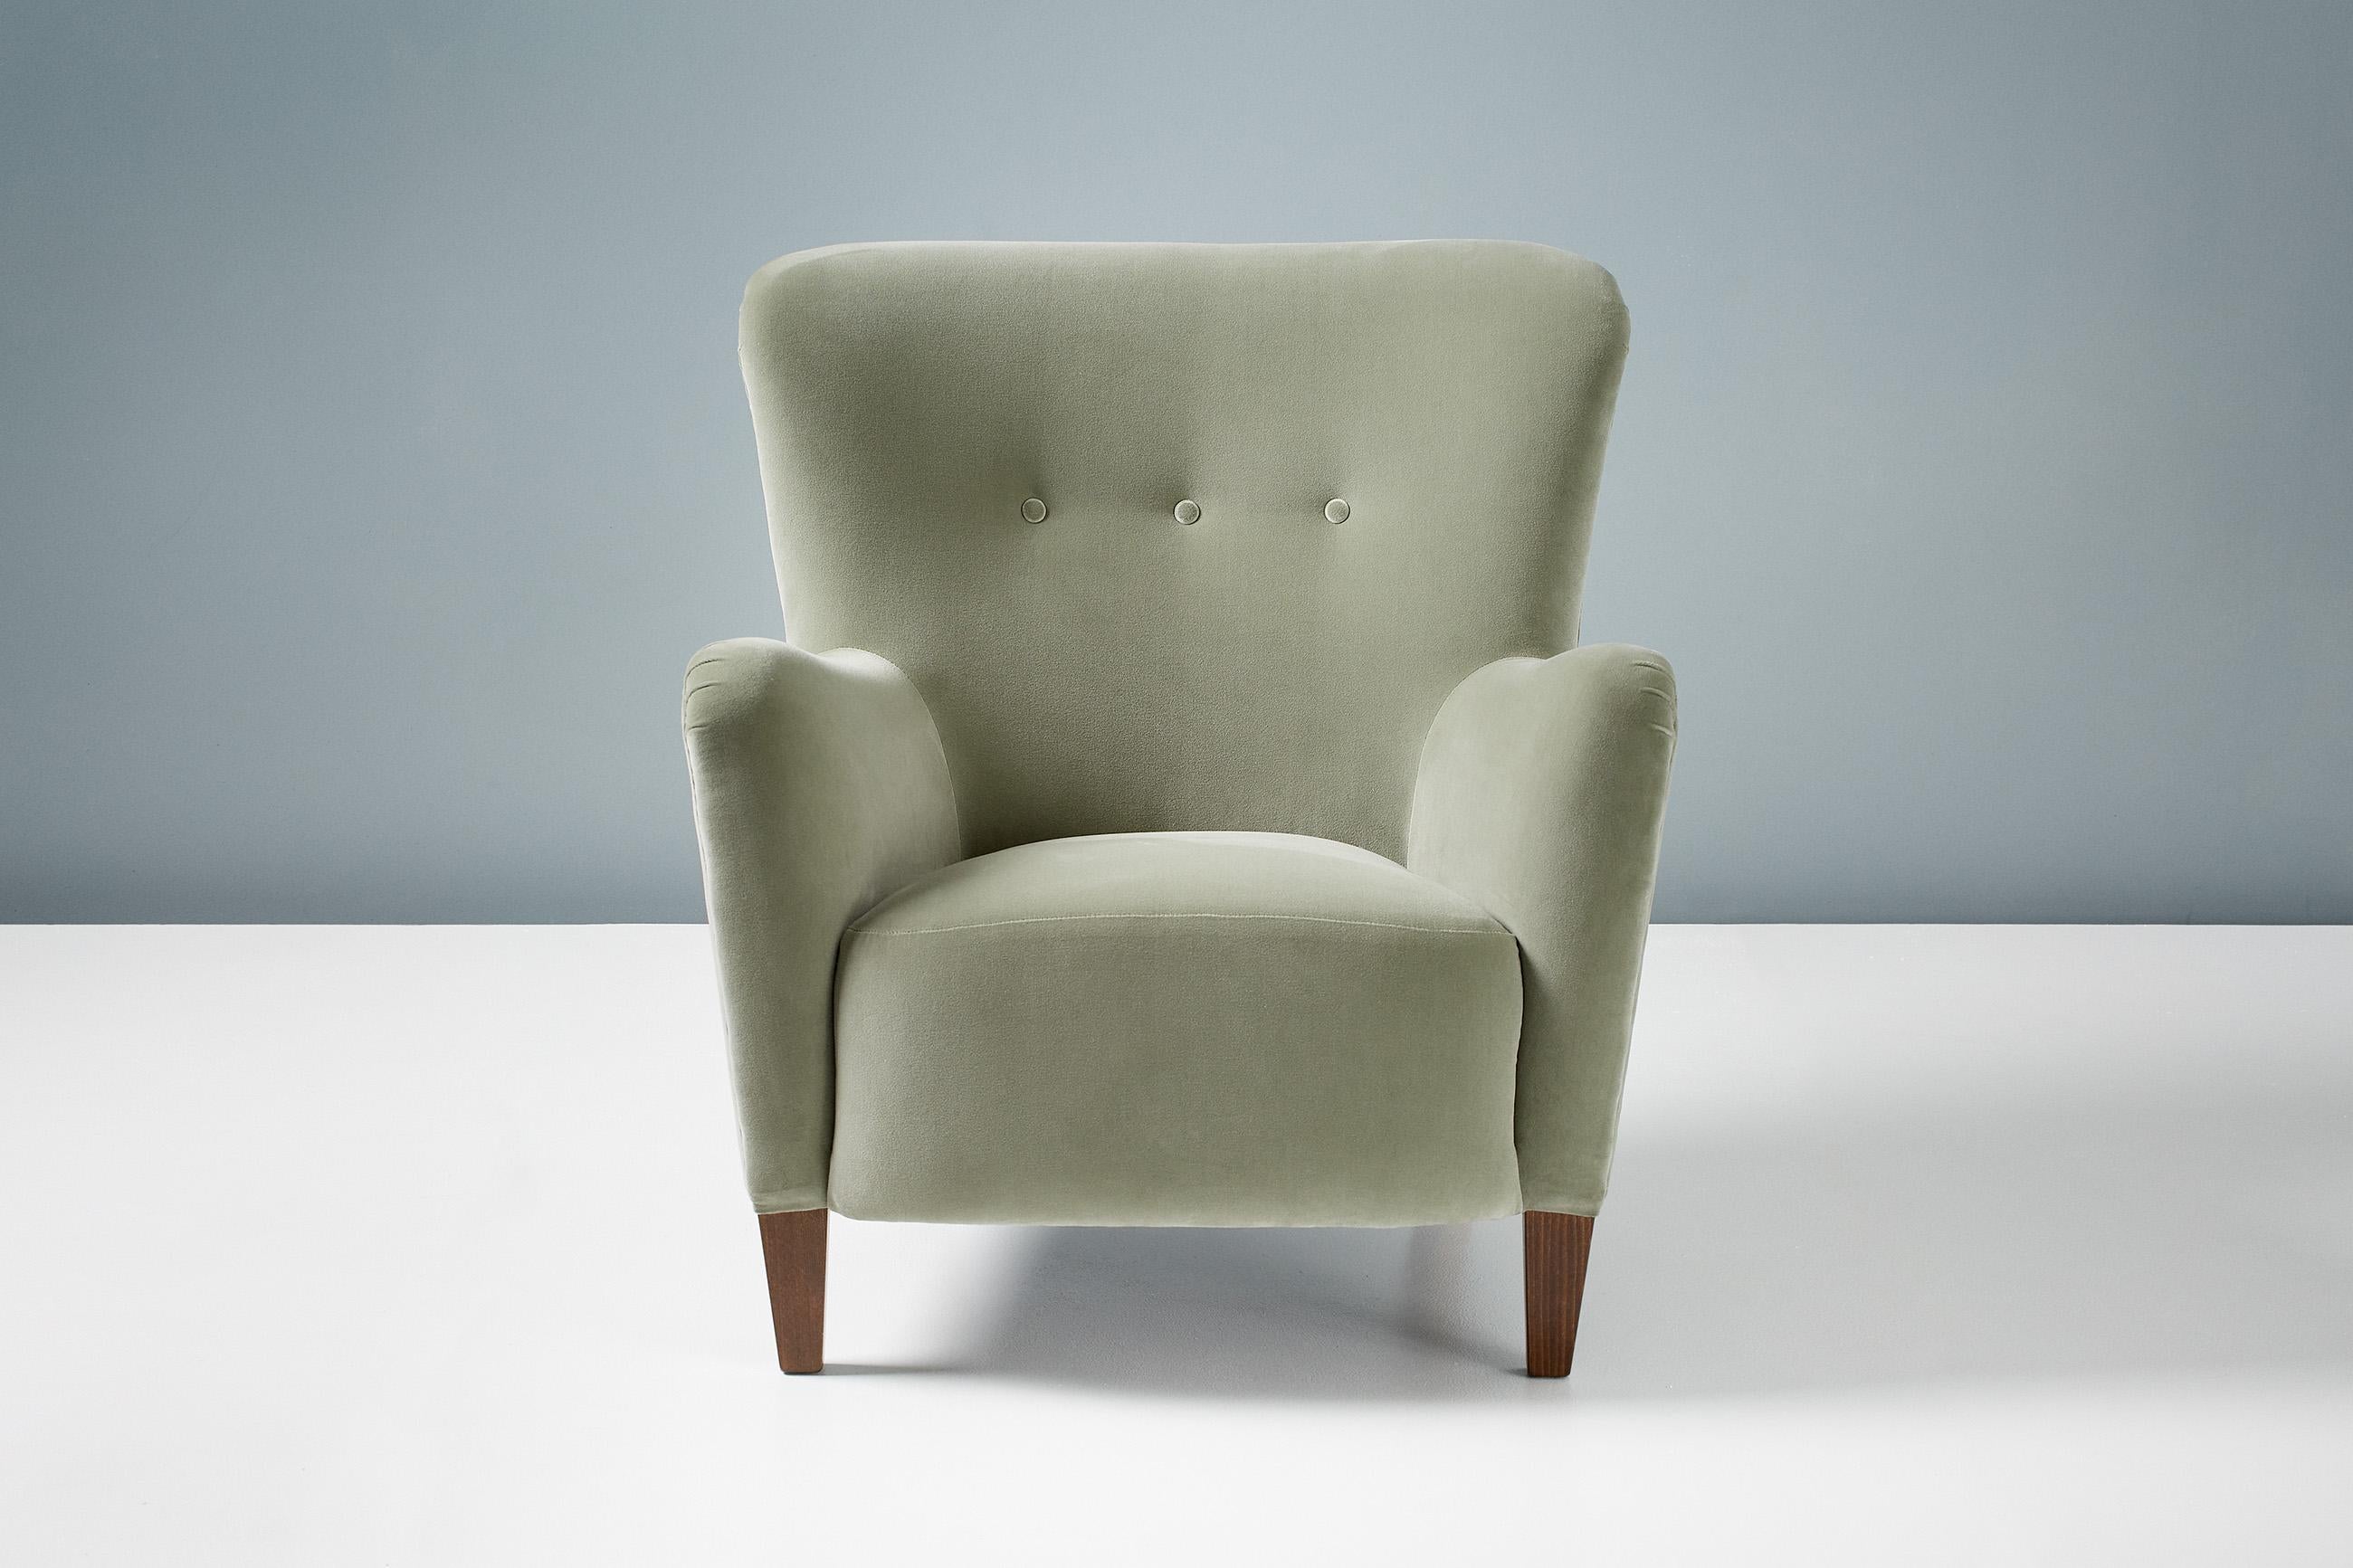 Dagmar design

RYO armchairs

A pair of custom made lounge chairs developed and produced at our workshops in London using the highest quality materials. These examples are upholstered in luxurious cotton velvet and feature stained beach legs.